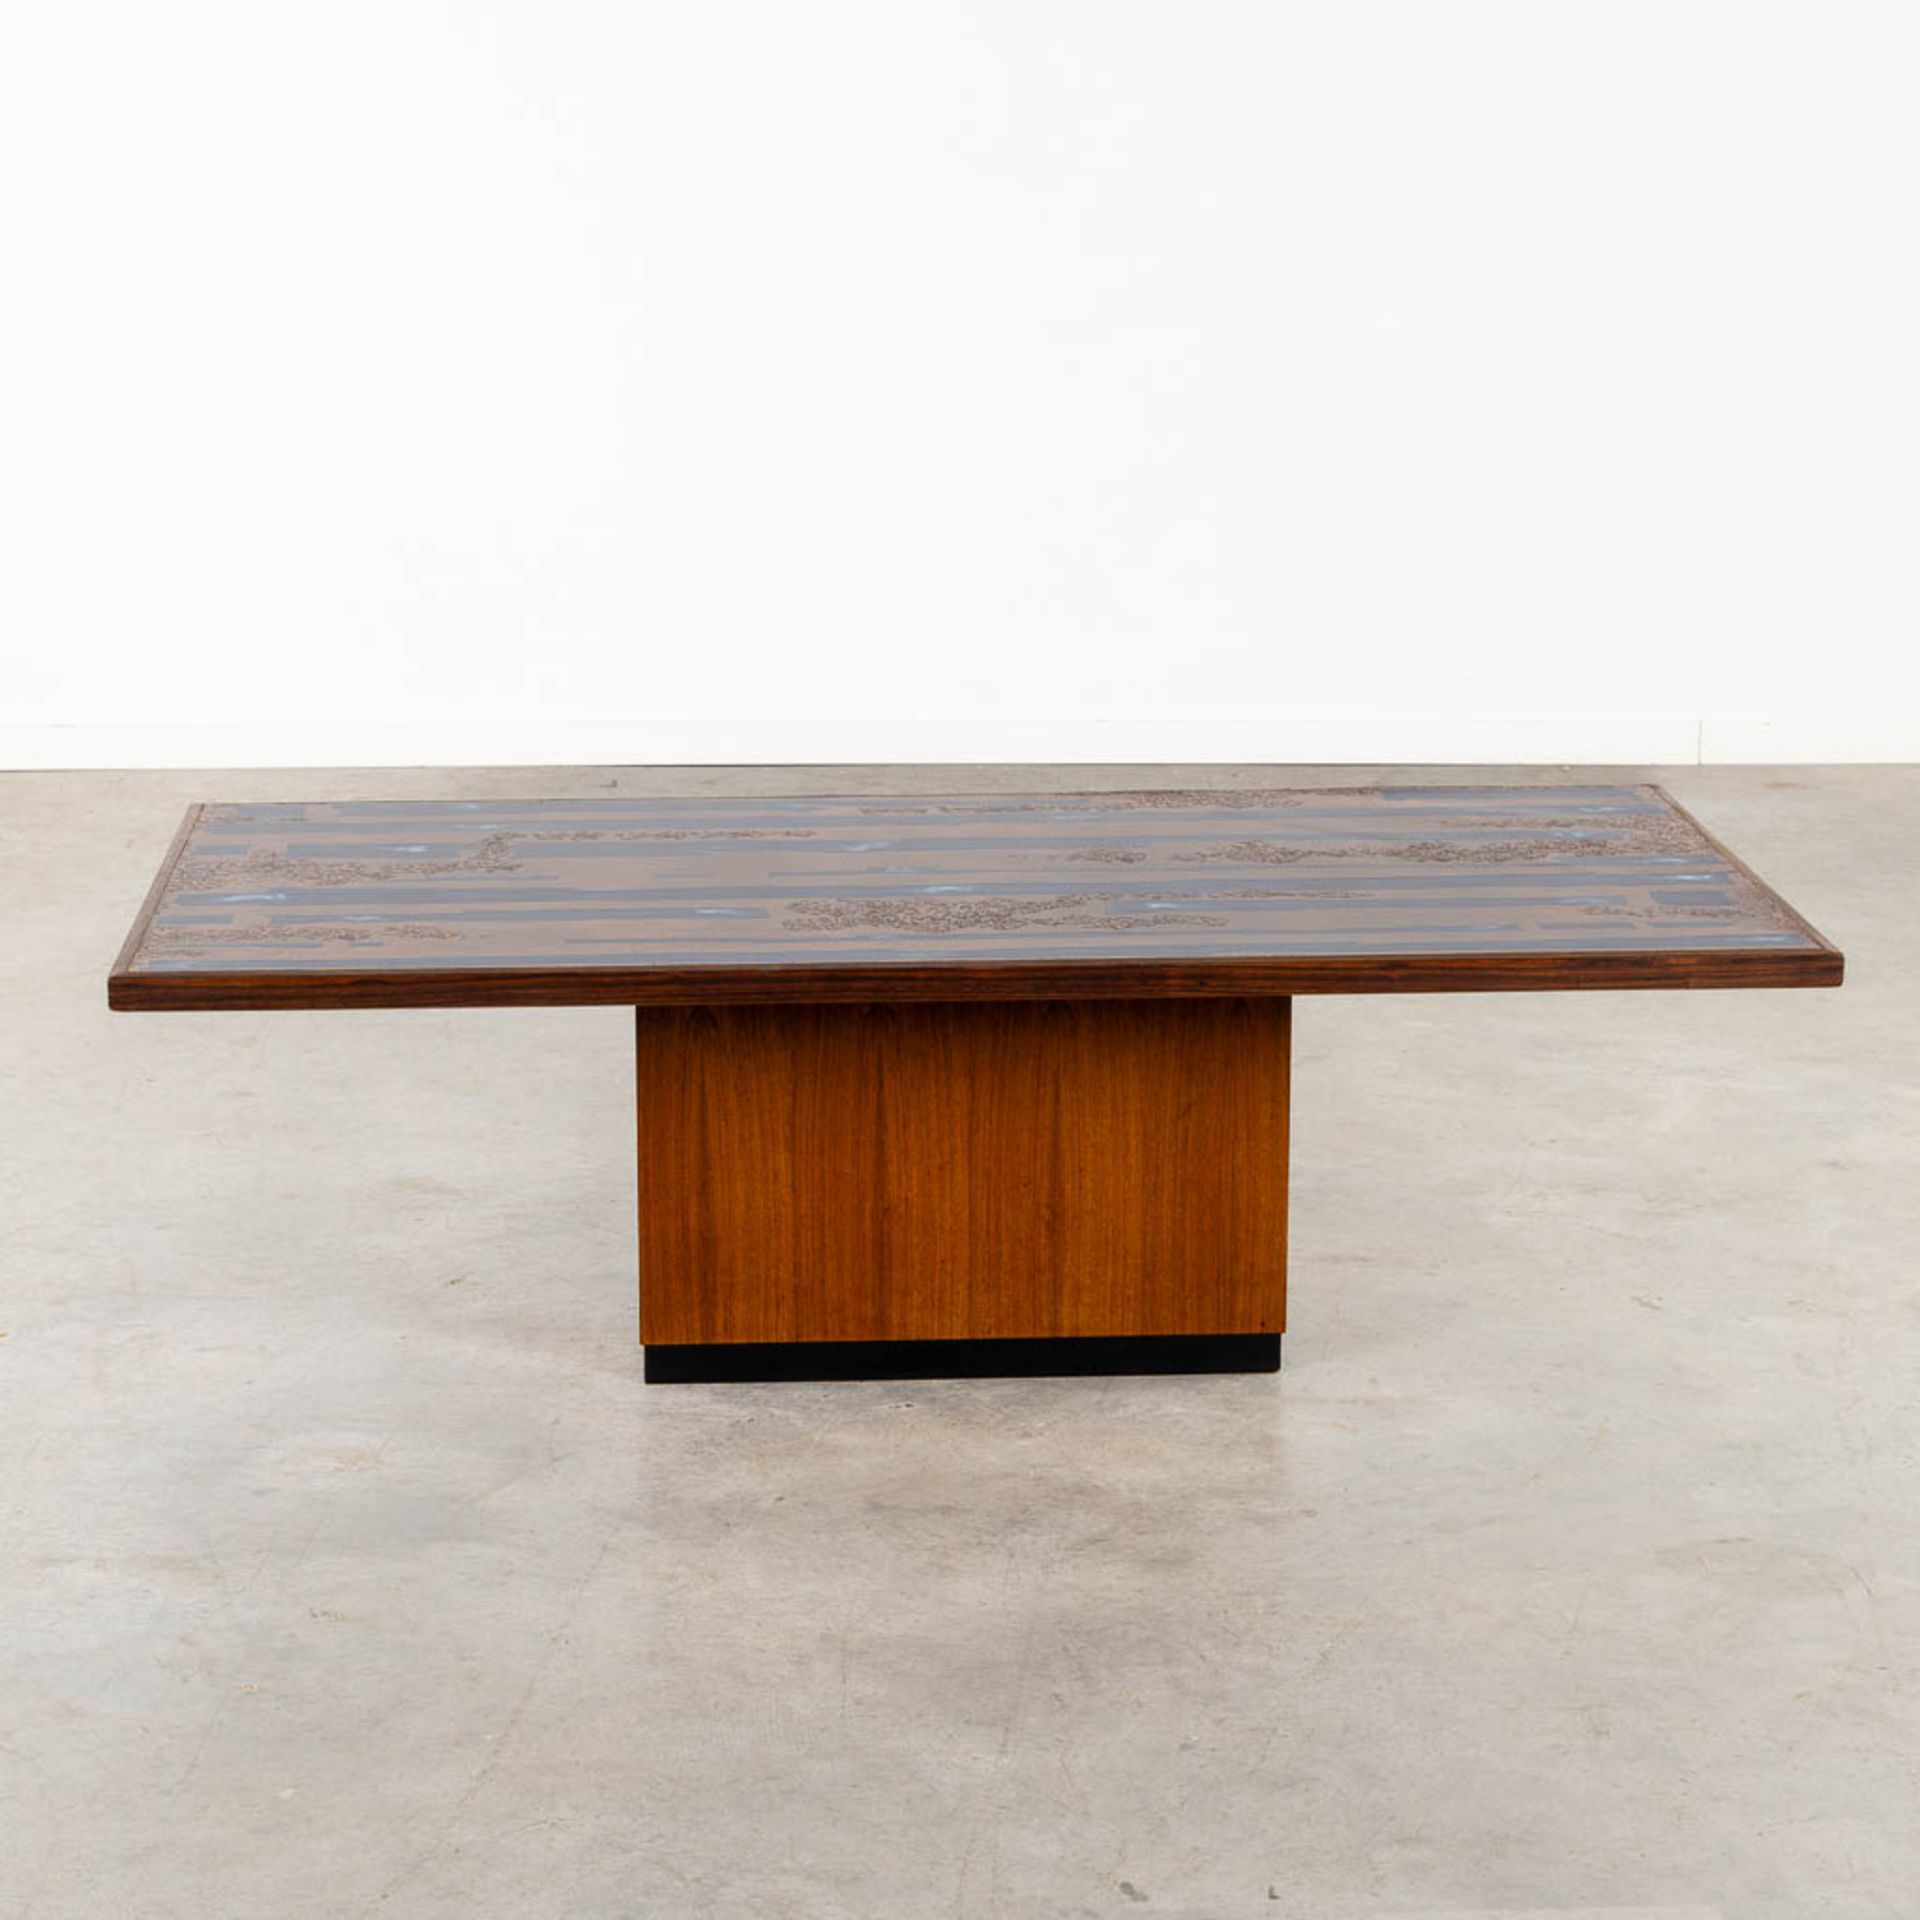 Heinz LILIENTHAL (1927-2006) 'Coffee Table' . (L:75 x W:150 x H:45 cm) - Image 3 of 10